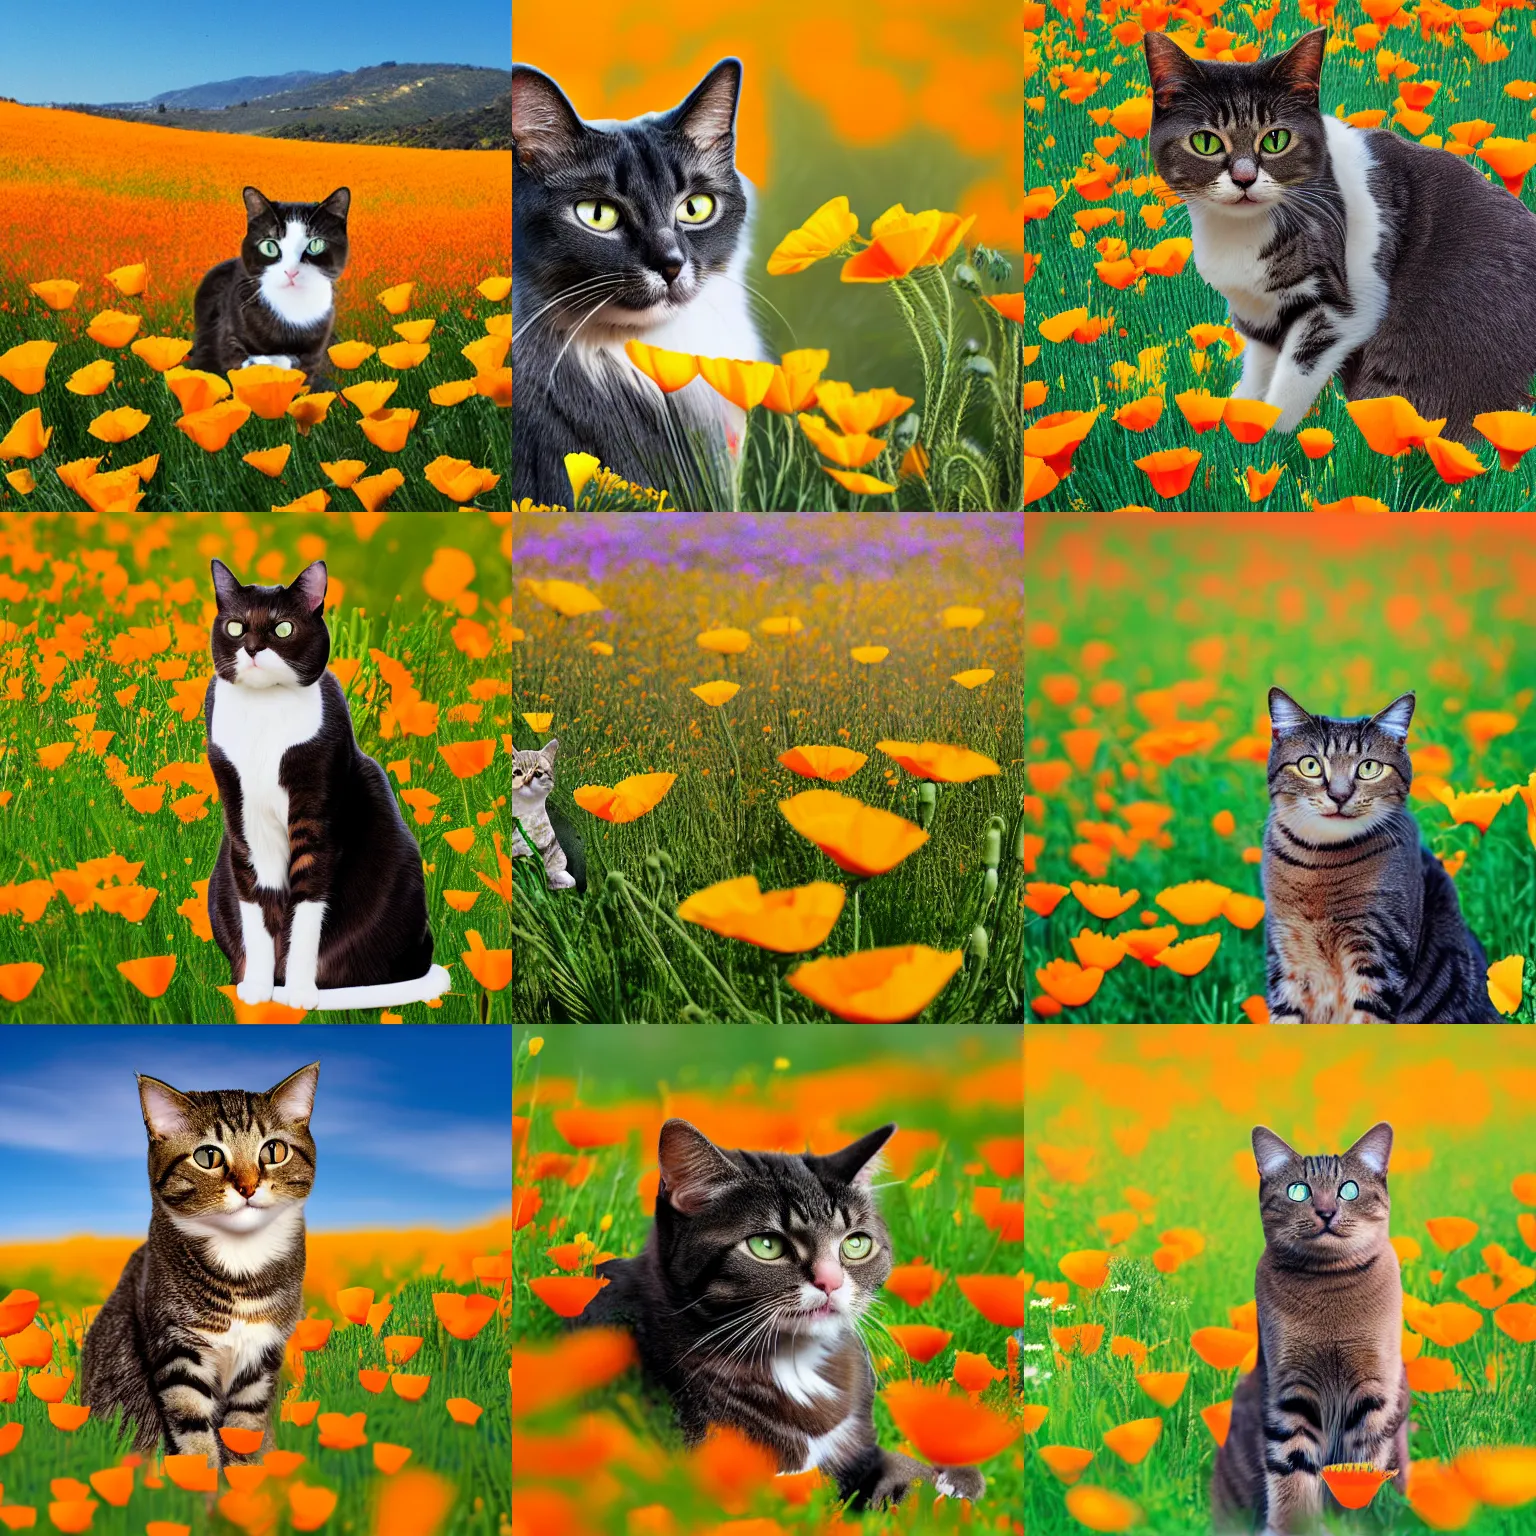 Prompt: 2D image of a cat sitting in california poppies field